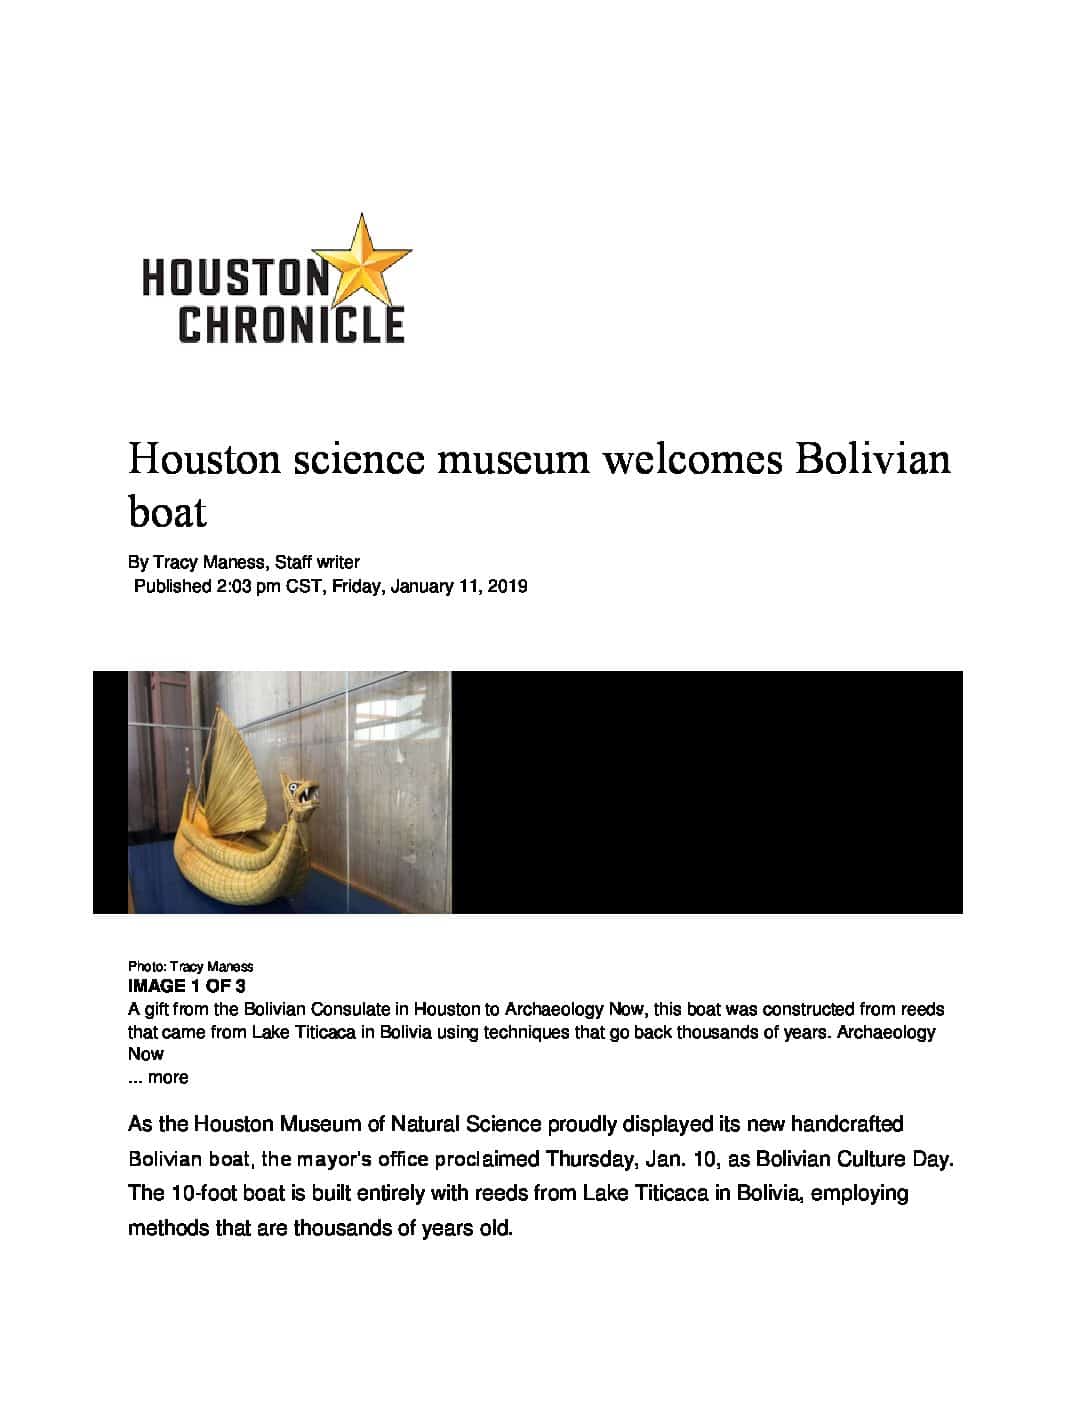 Houston Chronicle Media Placement